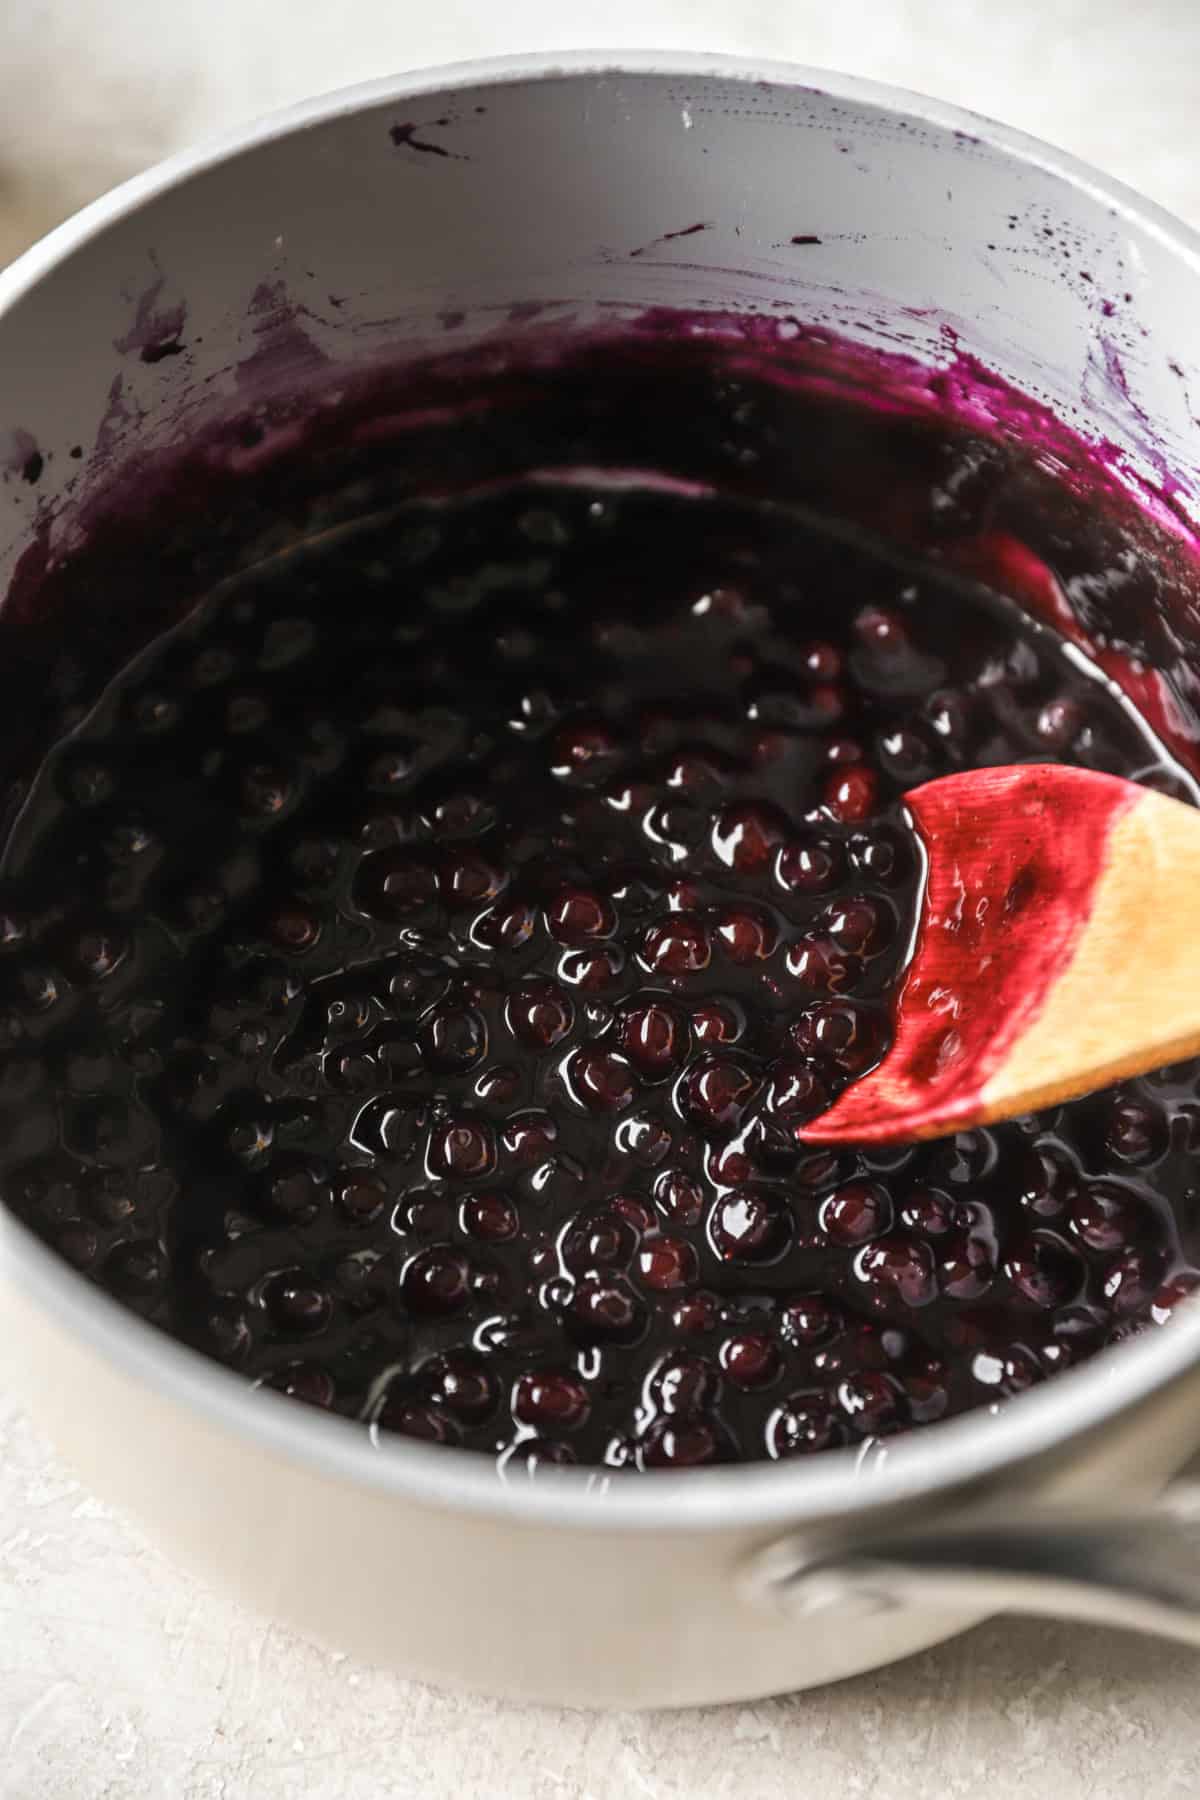 Blueberry filling.